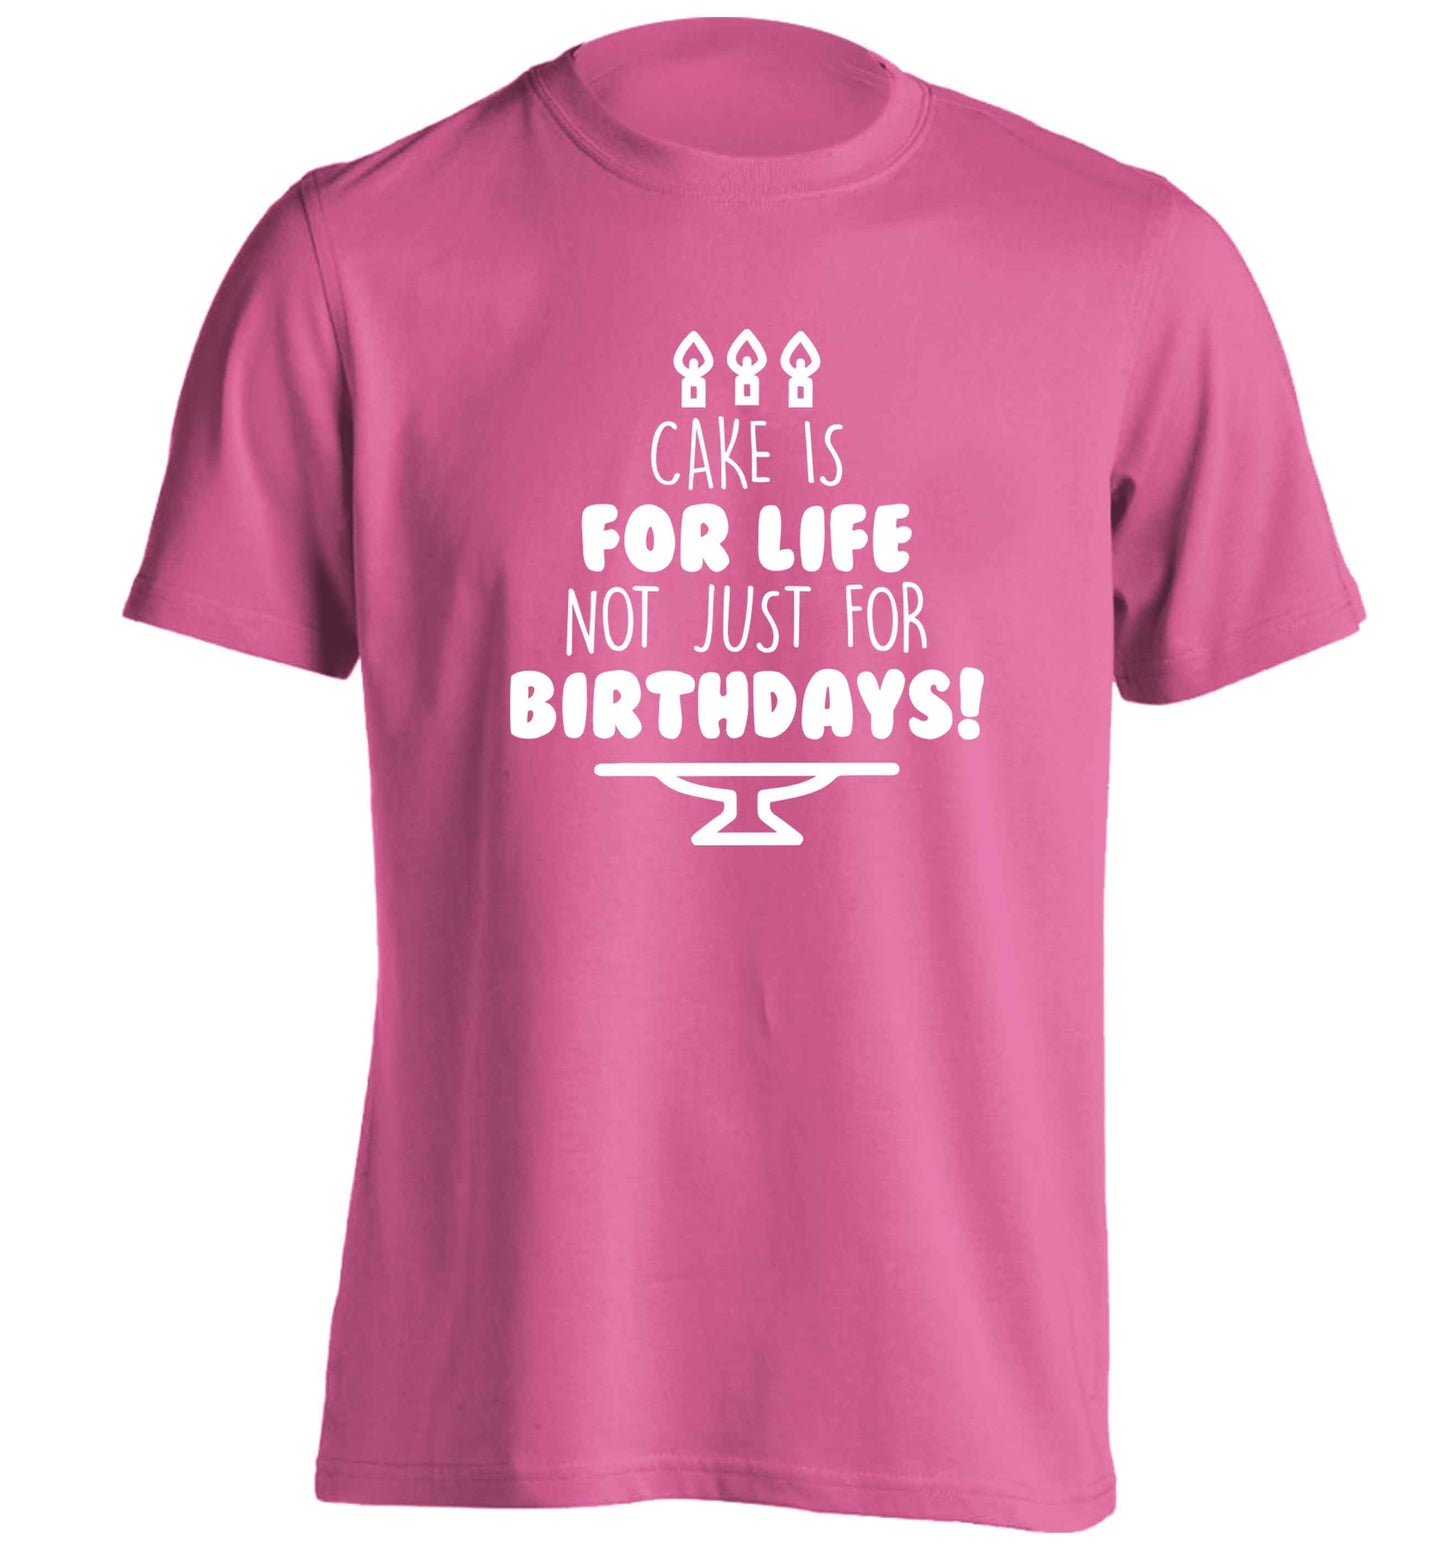 Cake is for life not just for birthdays adults unisex pink Tshirt 2XL